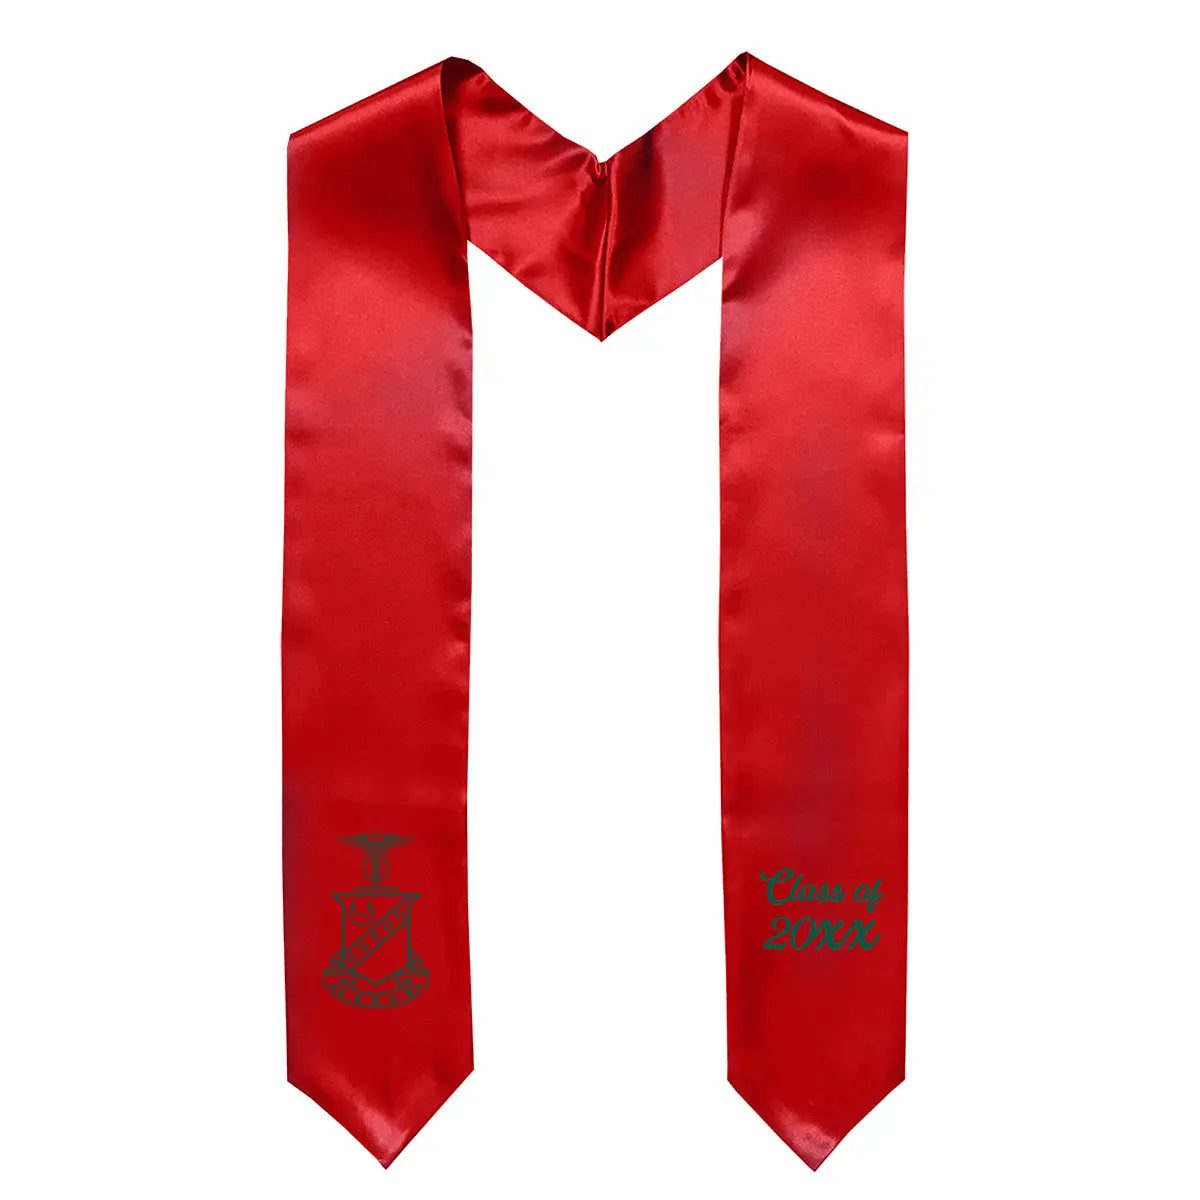 Kappa Sig Embroidered Crest Graduation Stole - Kappa Sigma Official Store